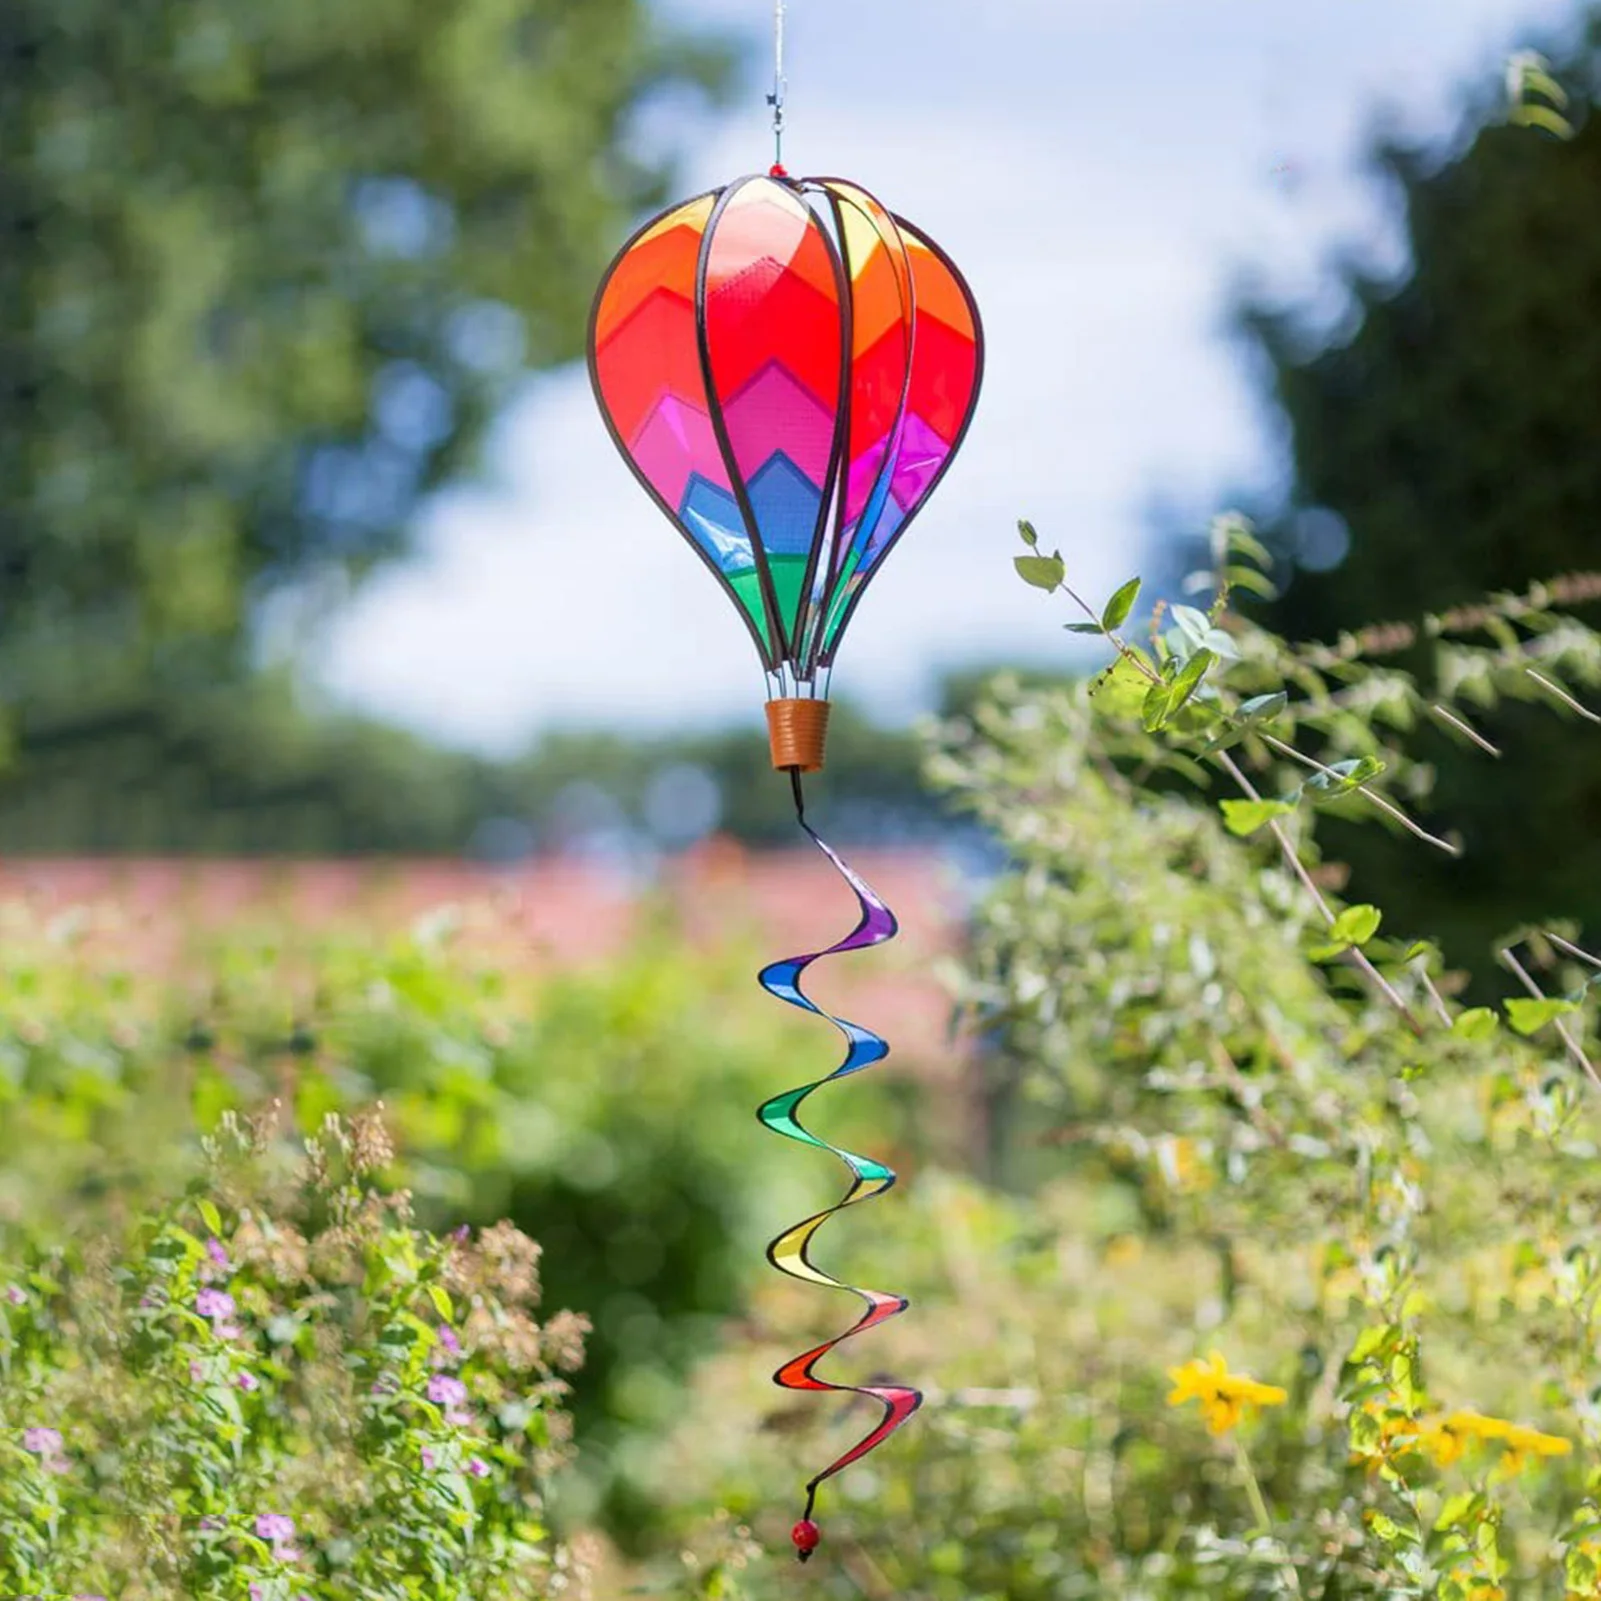 Wind Chimes Rainbow Hot Air Balloon Wind Spinner Rotating Sequins Windmill Outdoor Hanging Rainbow Color Attractions Astounding